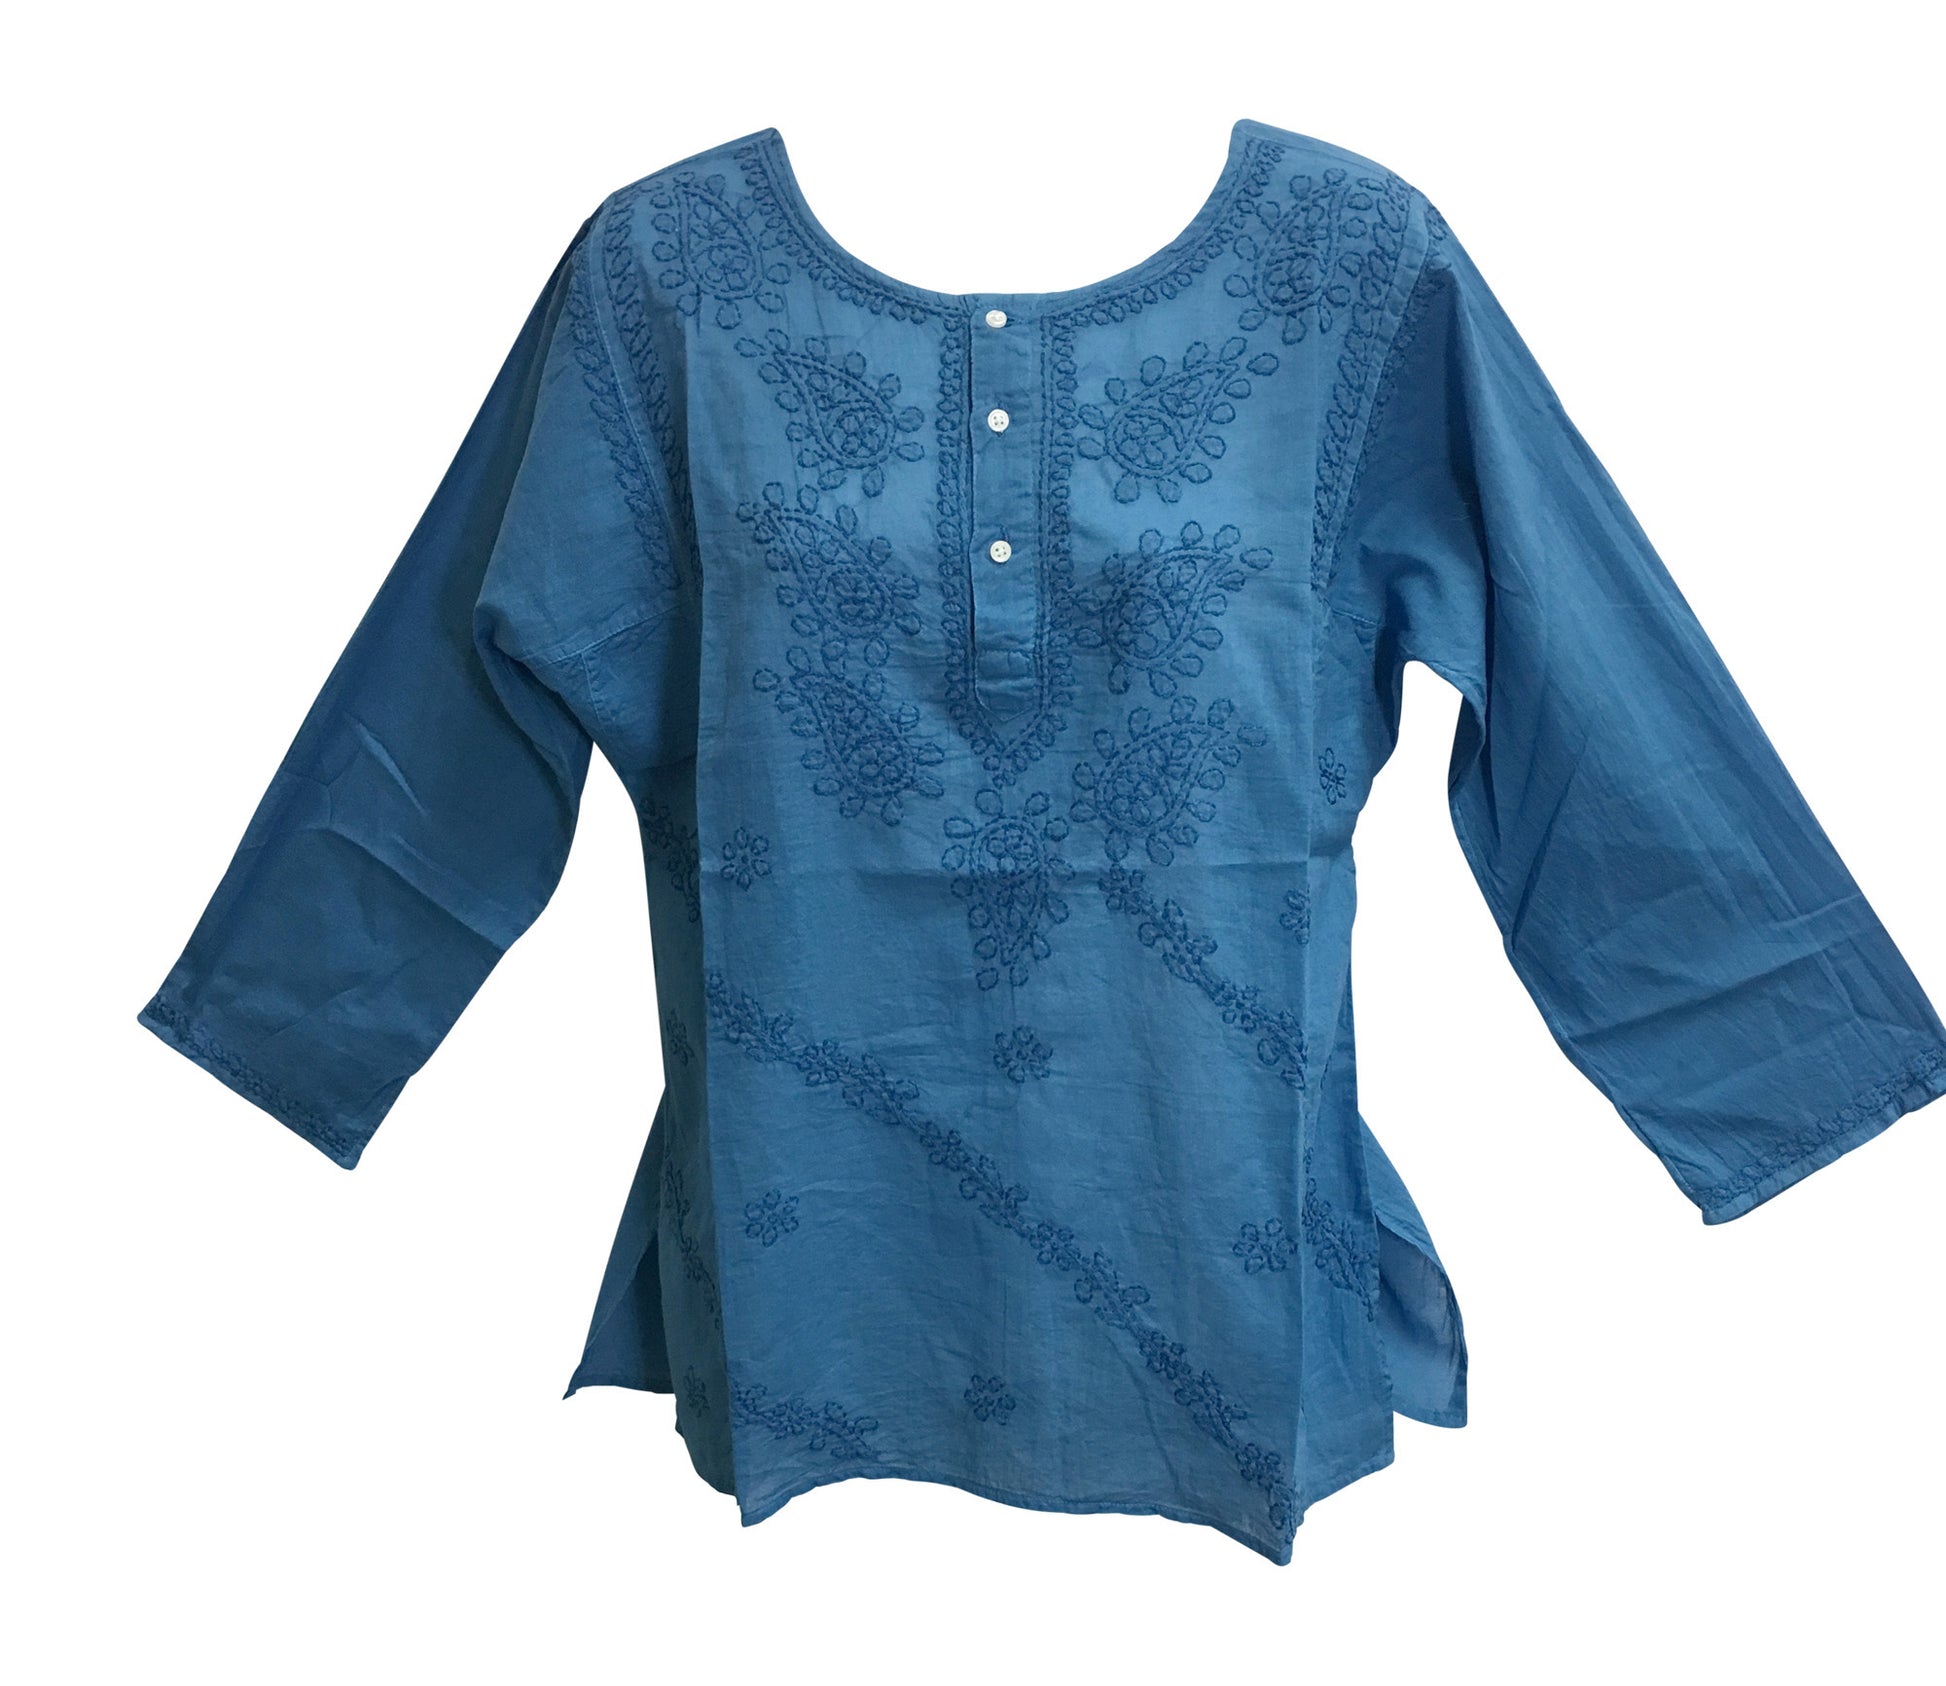 Classic Indian Gauze Cotton Embroidered Plus Sixties Long Sleeve Blouse Top - Ambali Fashion Blouses 